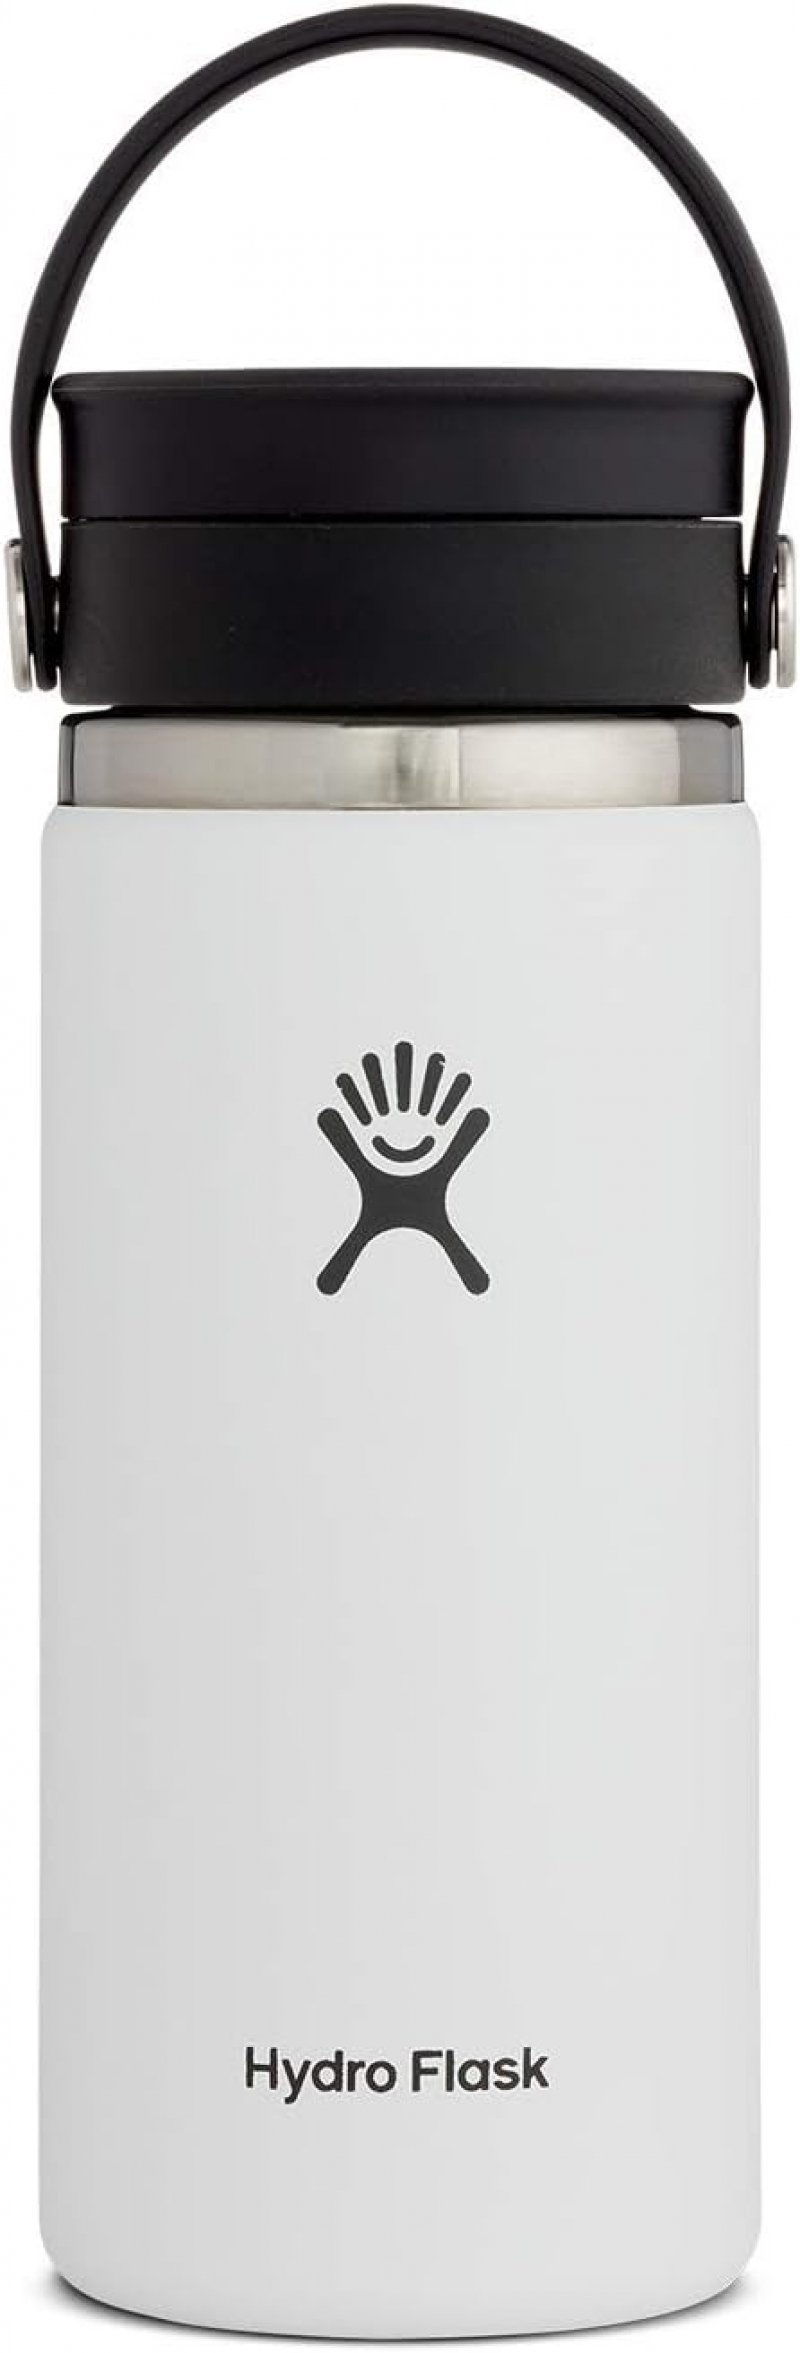 ihocon: Hydro Flask Stainless Steel Wide Mouth Bottle with Flex Sip Lid and Double-Wall Vacuum Insulation for Coffee, Tea and Drinks  16 oz, 不銹鋼廣口保温水瓶